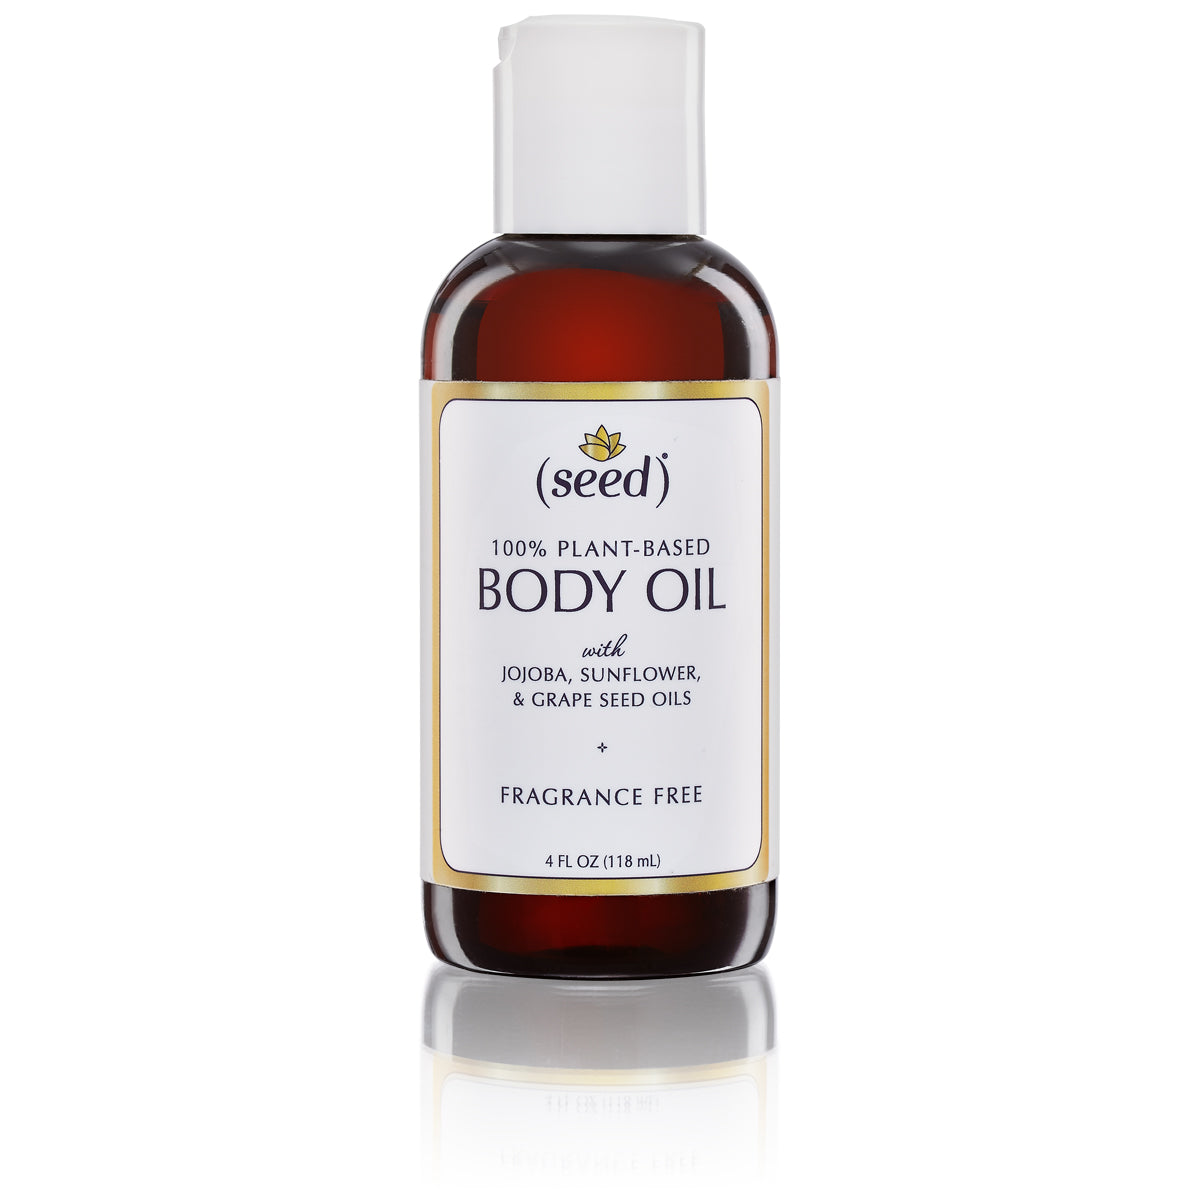 Seed Fragrance Free Body Oil is also available in a dispenser disc cap (in addition to our spray mist)